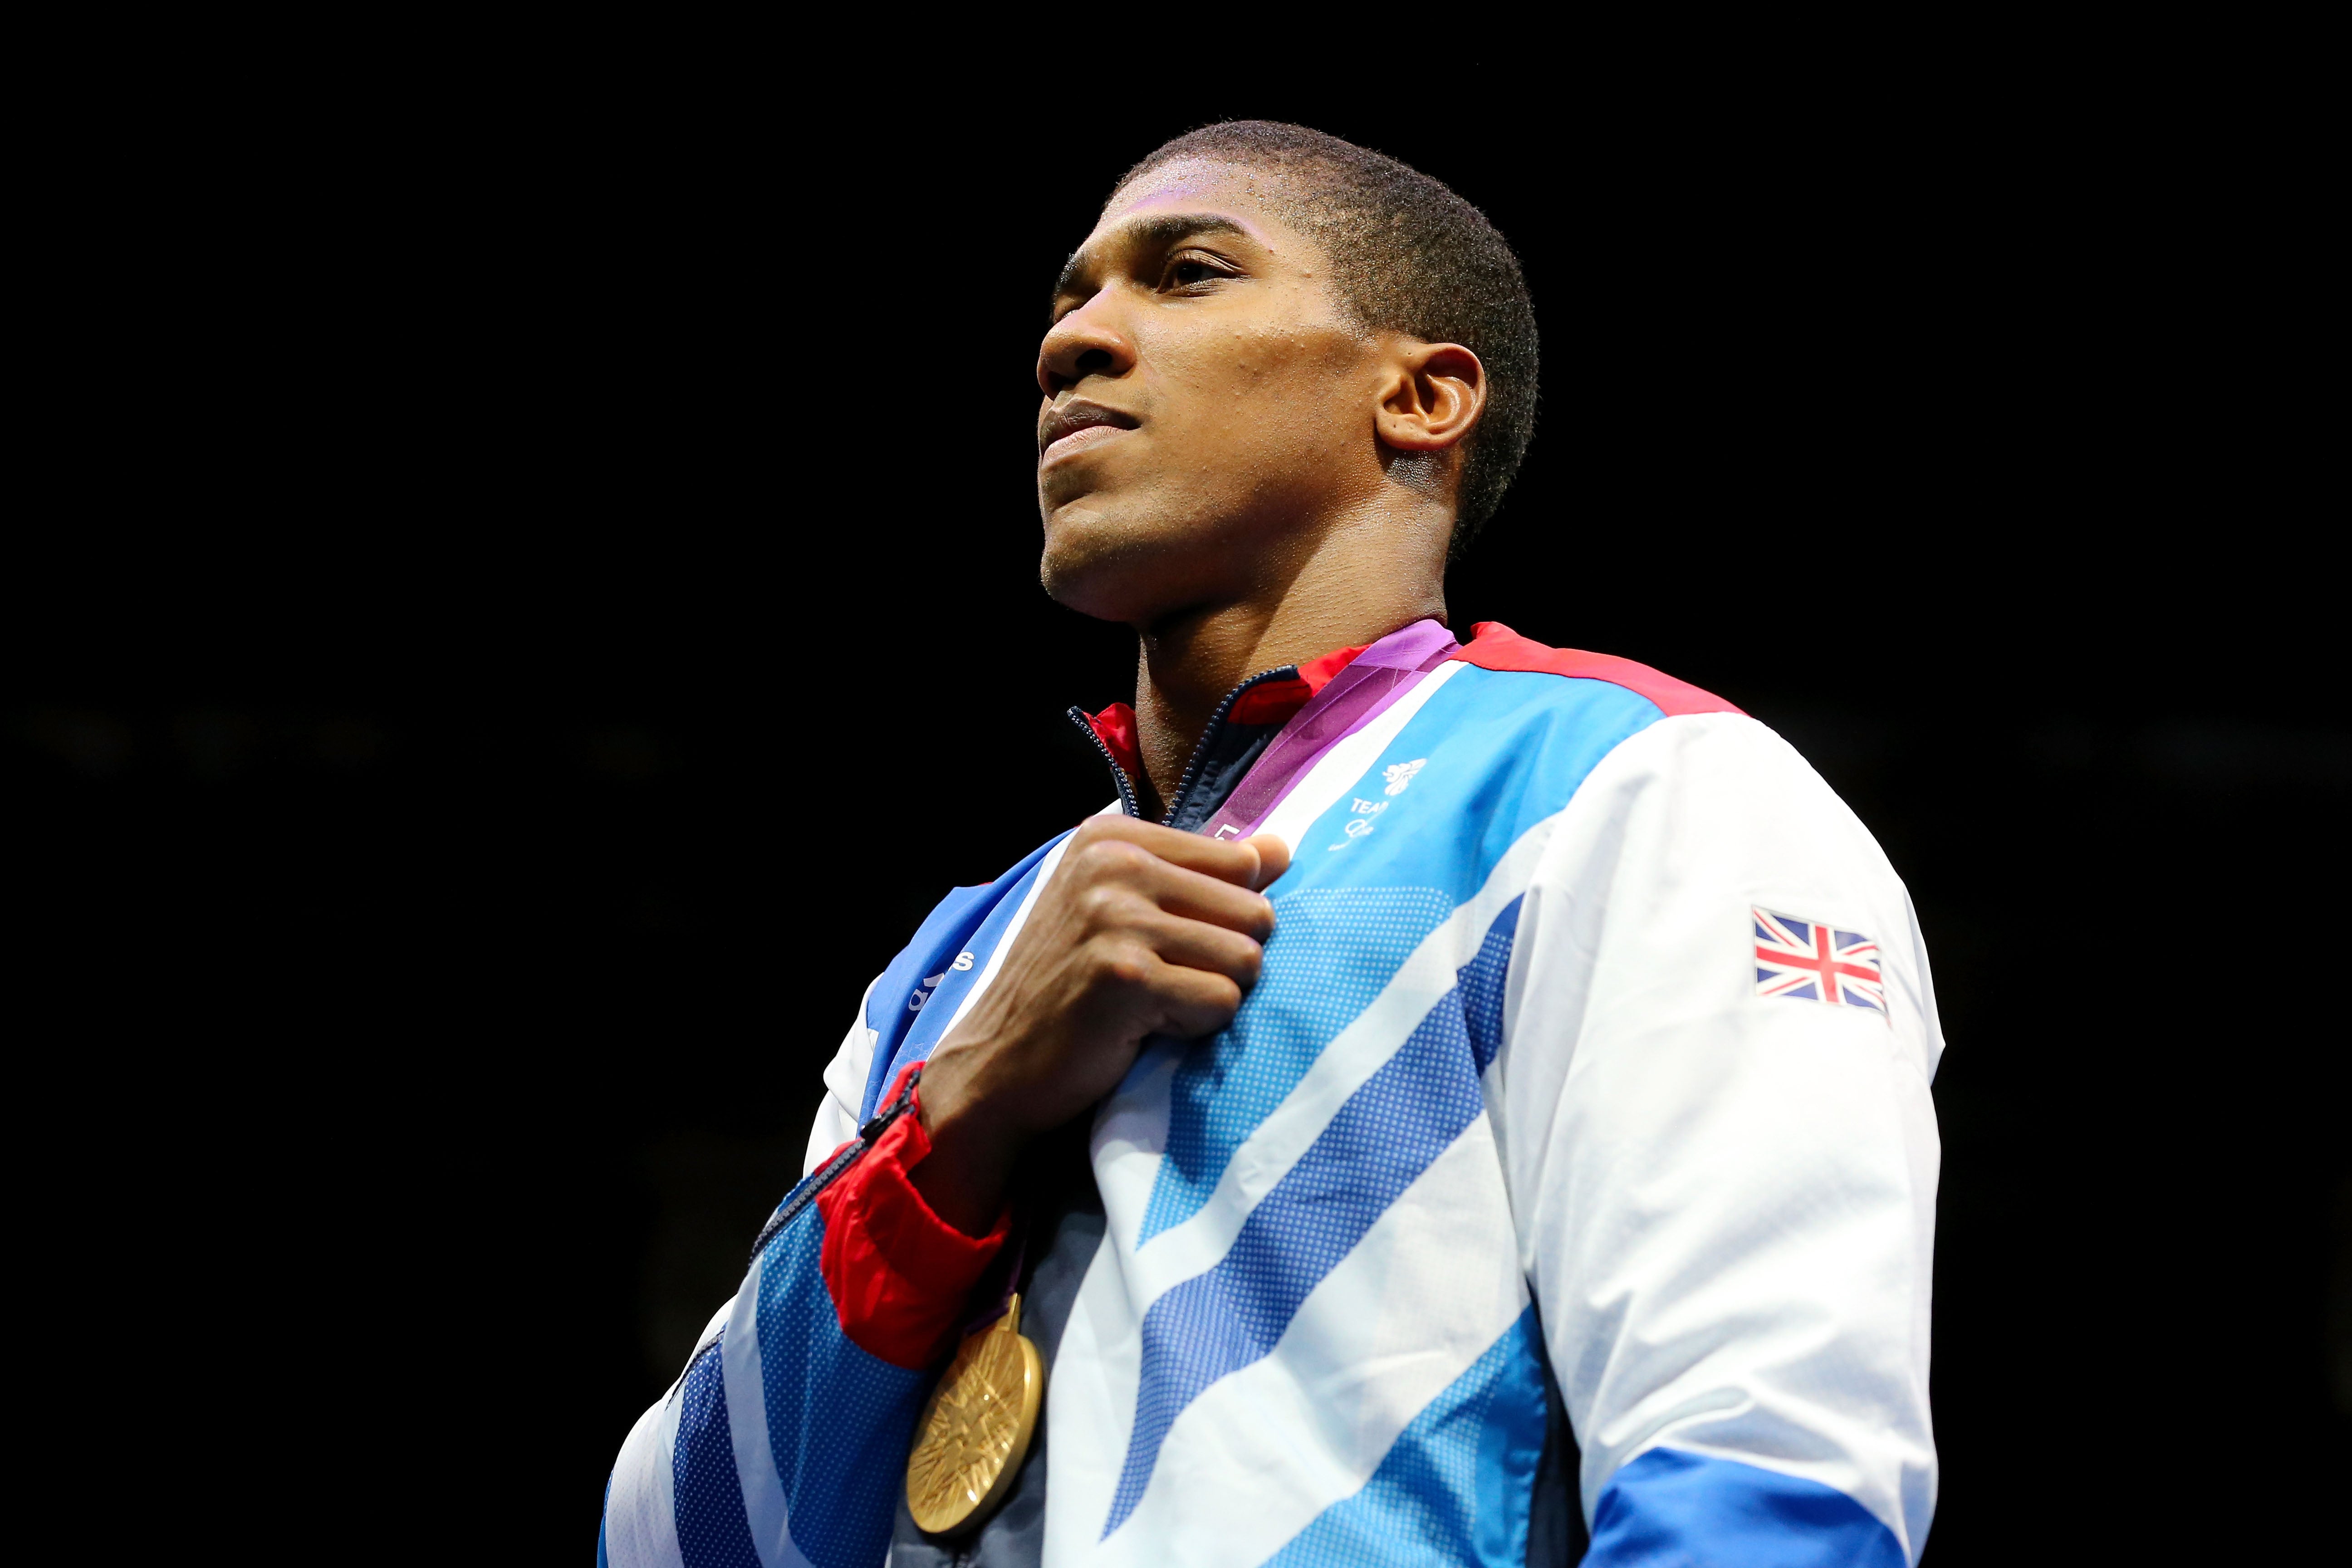 Anthony Joshua won a gold medal at the London 2012 Games